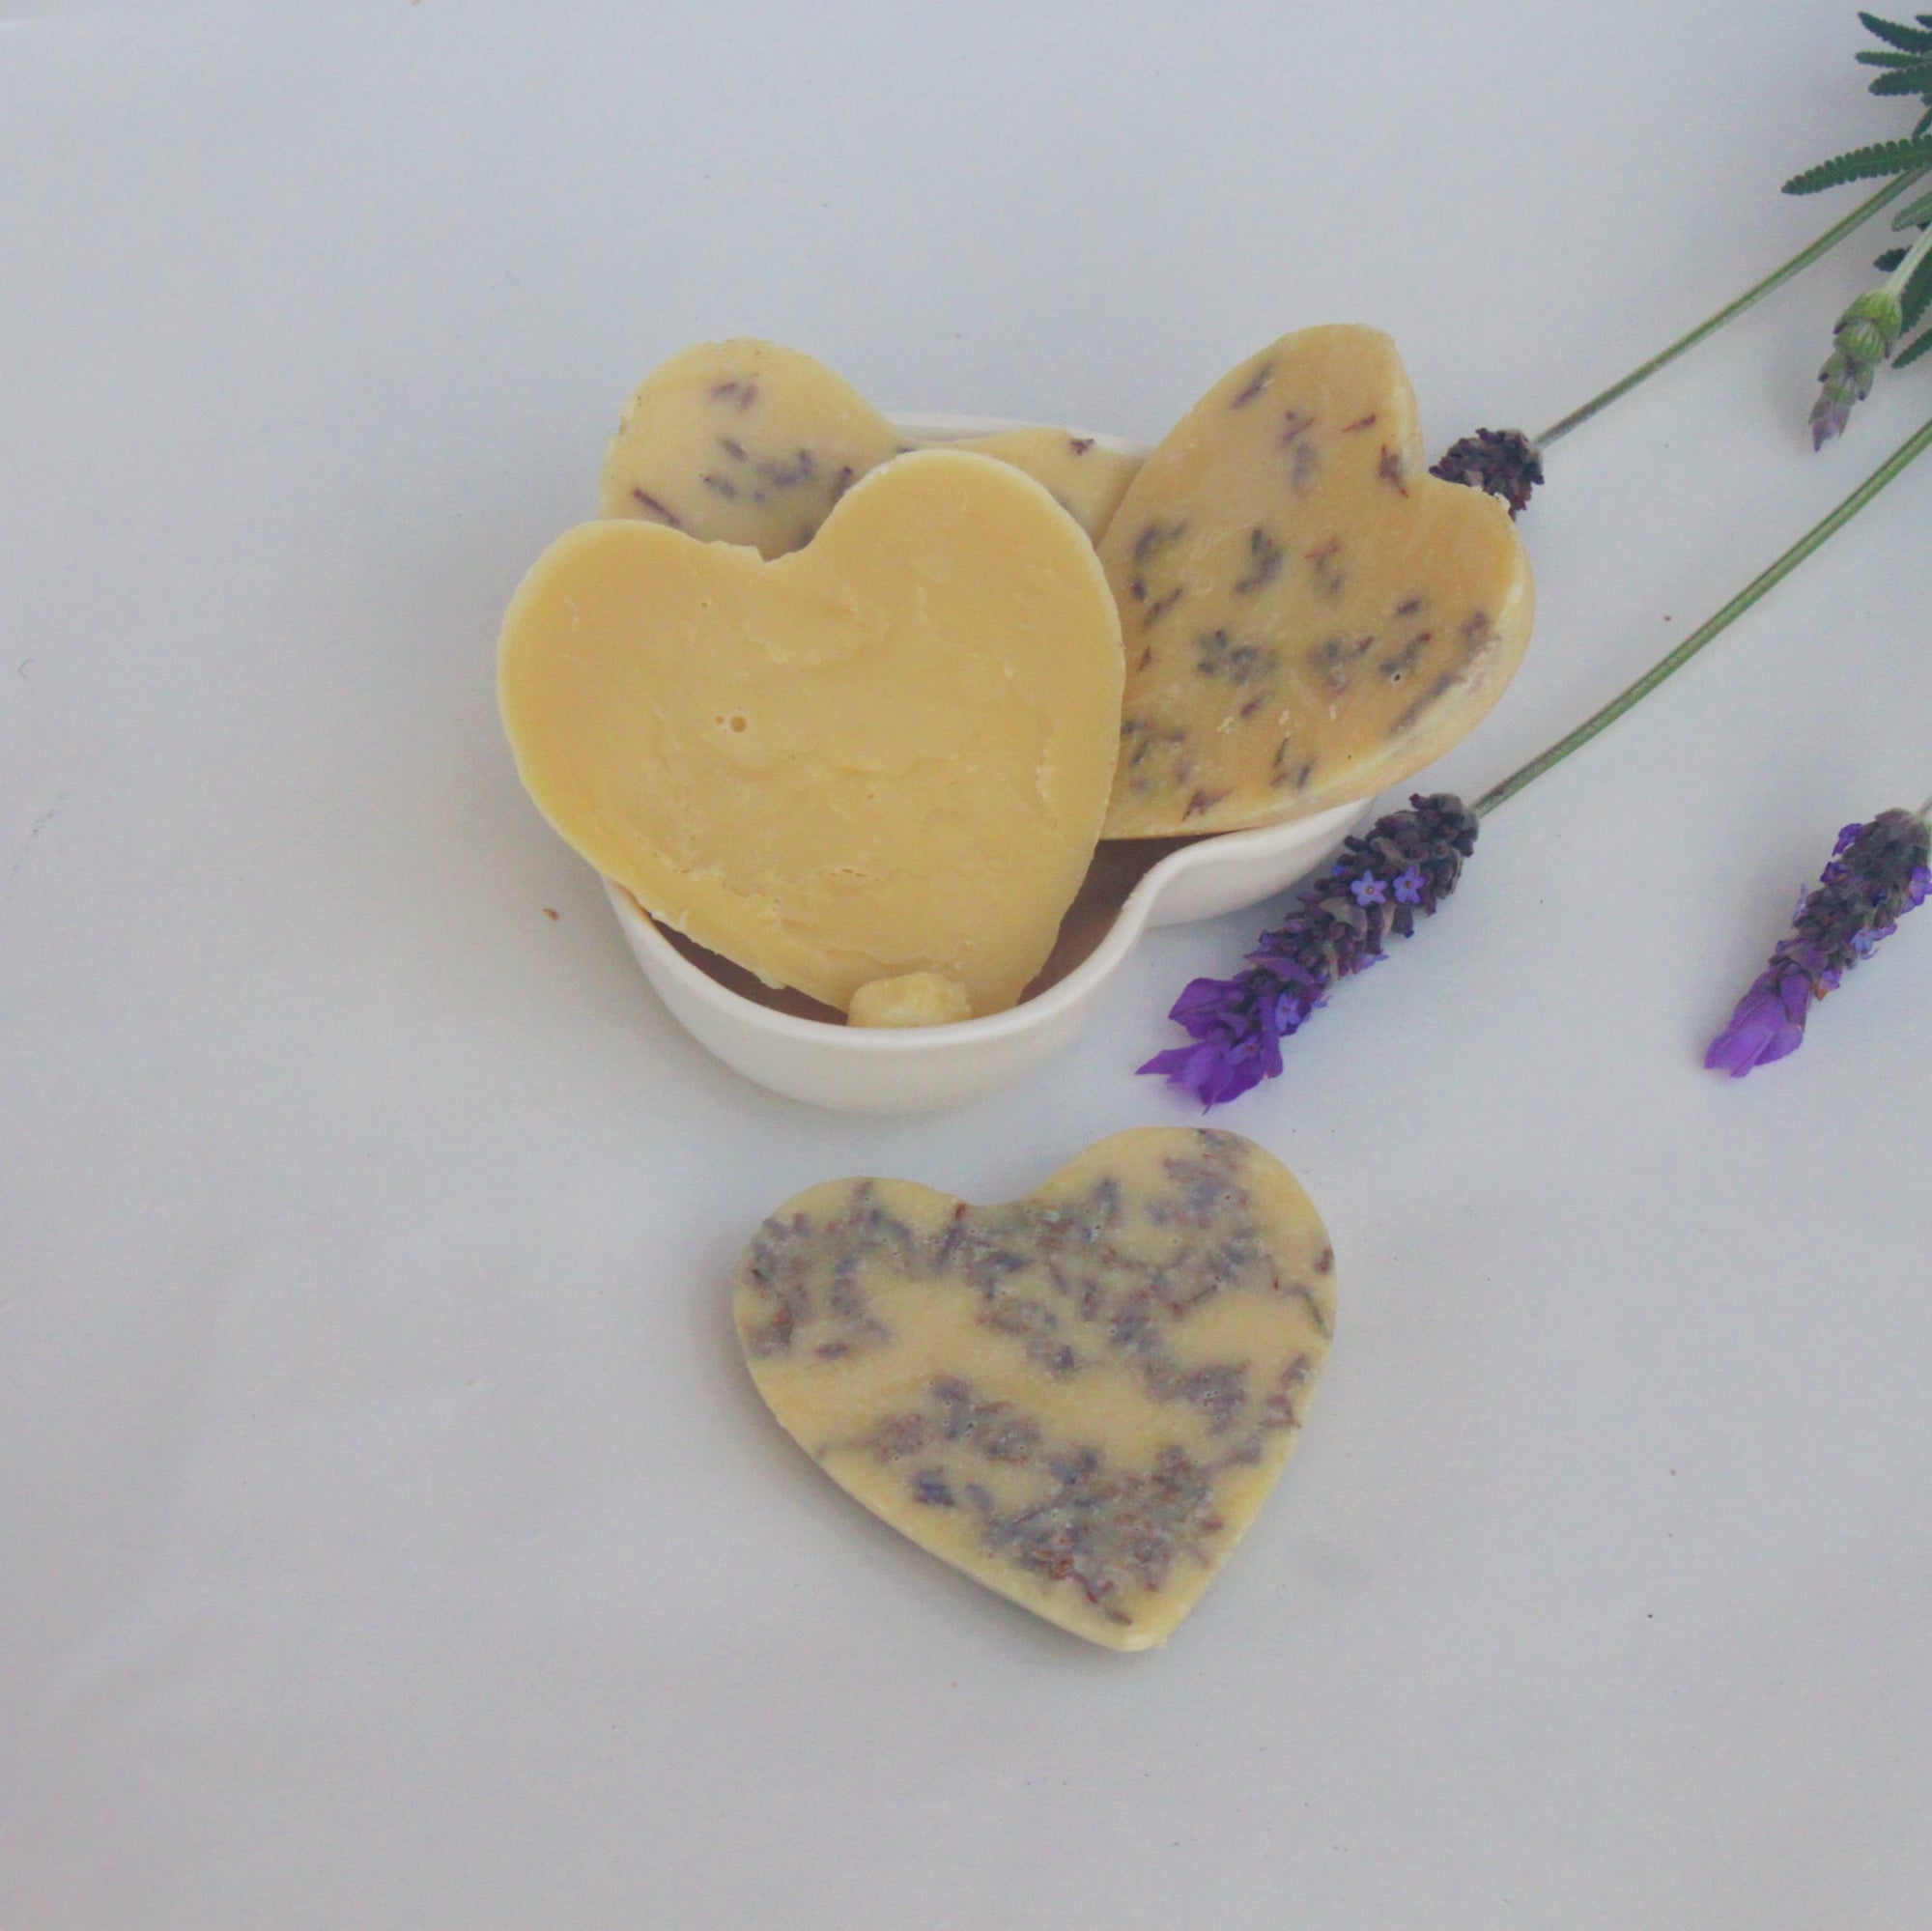 Lotion bar made with shea butter, cocoa butter and beeswax.  lotion bar with lavender essential oil and lavender flowers